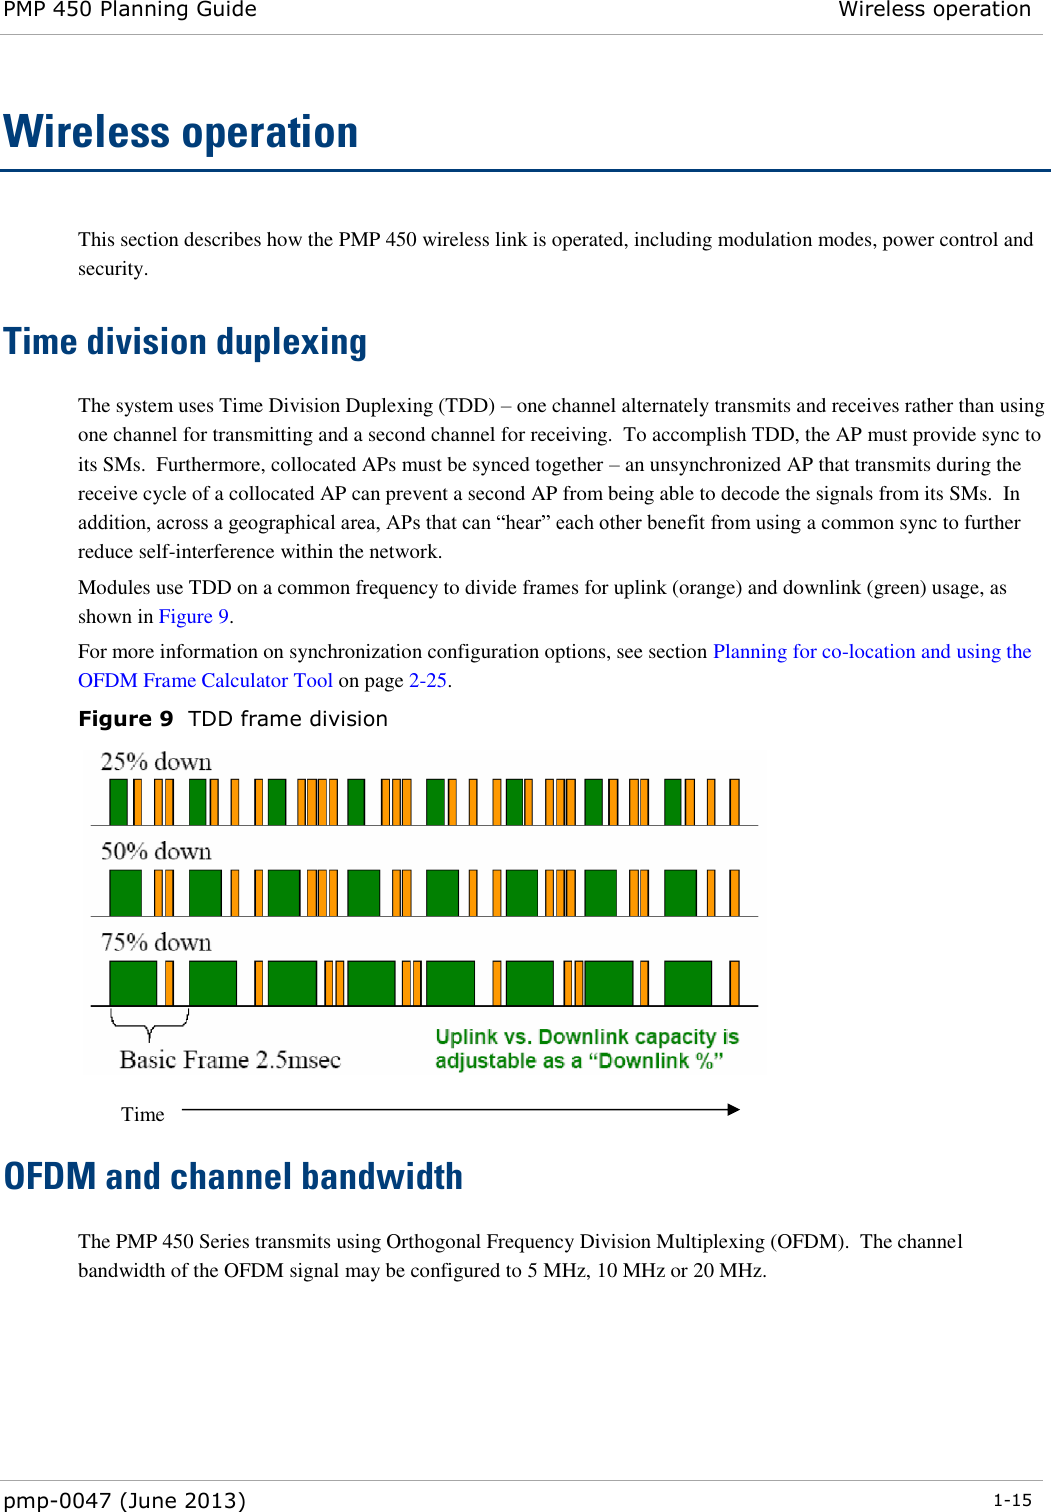 PMP 450 Planning Guide Wireless operation  pmp-0047 (June 2013)  1-15  Wireless operation This section describes how the PMP 450 wireless link is operated, including modulation modes, power control and security. Time division duplexing The system uses Time Division Duplexing (TDD) – one channel alternately transmits and receives rather than using one channel for transmitting and a second channel for receiving.  To accomplish TDD, the AP must provide sync to its SMs.  Furthermore, collocated APs must be synced together – an unsynchronized AP that transmits during the receive cycle of a collocated AP can prevent a second AP from being able to decode the signals from its SMs.  In addition, across a geographical area, APs that can “hear” each other benefit from using a common sync to further reduce self-interference within the network. Modules use TDD on a common frequency to divide frames for uplink (orange) and downlink (green) usage, as shown in Figure 9. For more information on synchronization configuration options, see section Planning for co-location and using the OFDM Frame Calculator Tool on page 2-25. Figure 9  TDD frame division   OFDM and channel bandwidth The PMP 450 Series transmits using Orthogonal Frequency Division Multiplexing (OFDM).  The channel bandwidth of the OFDM signal may be configured to 5 MHz, 10 MHz or 20 MHz.    Time 